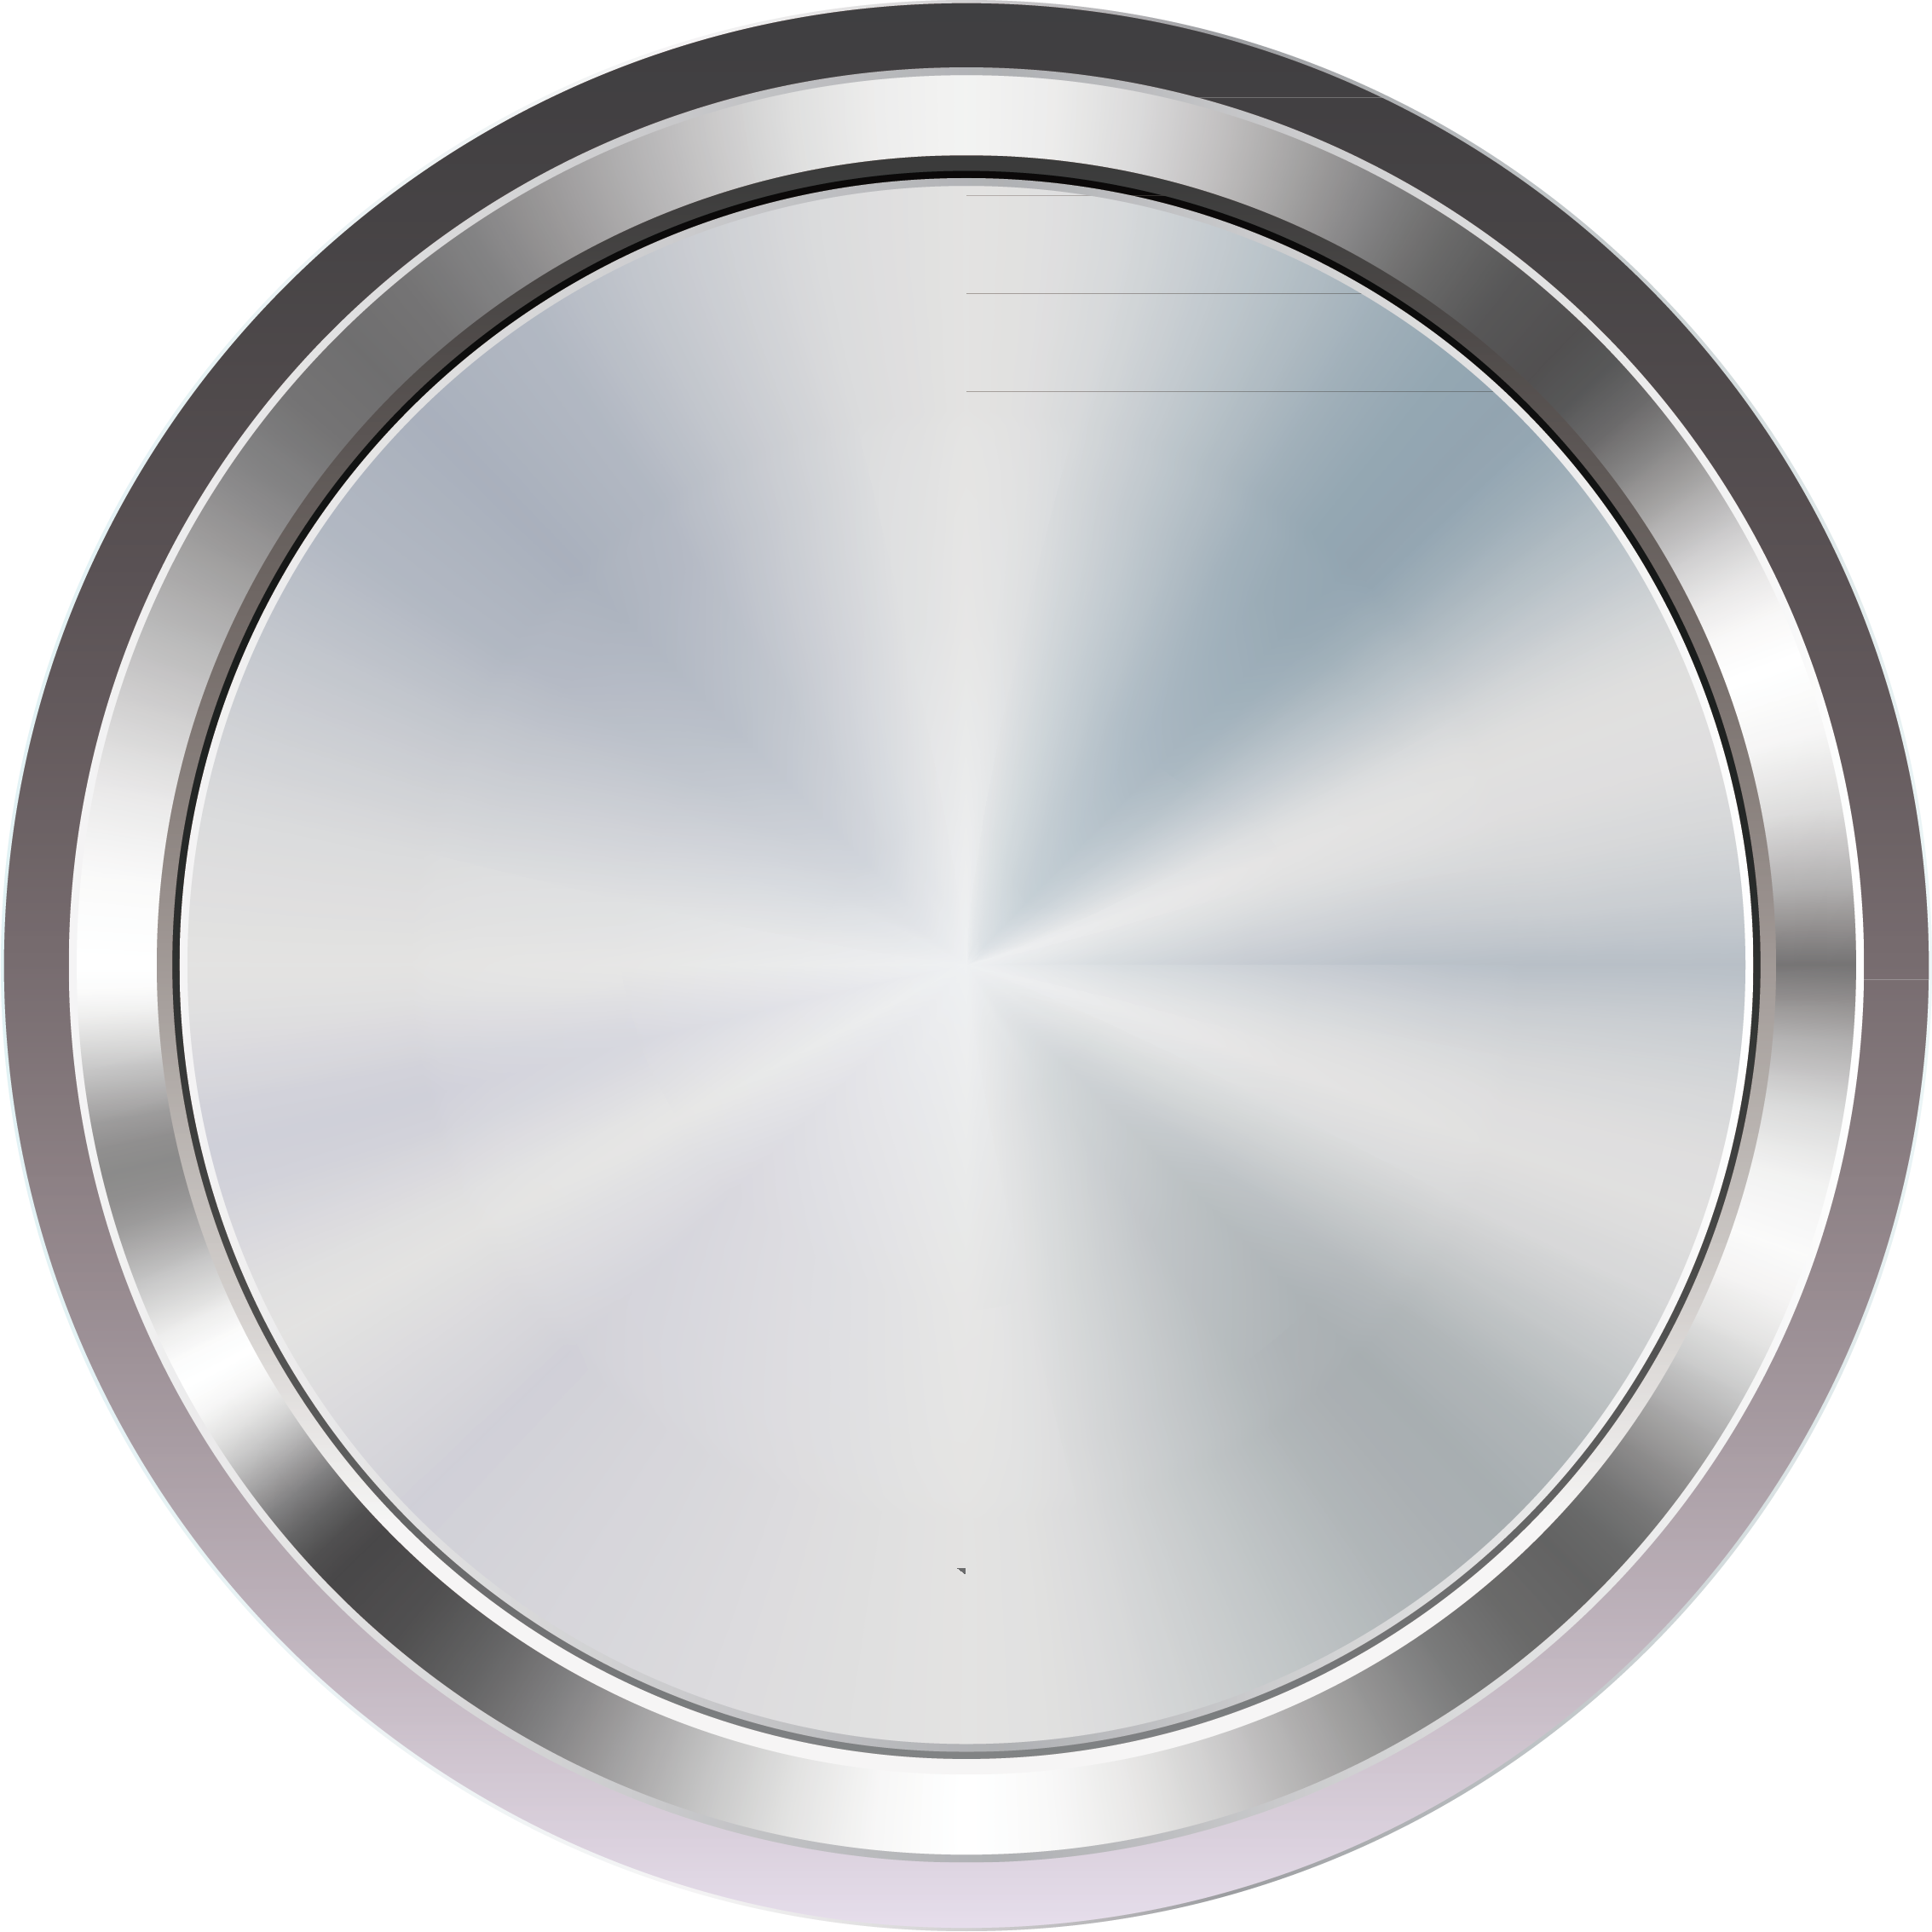 Button PNG Image with Transparent Background